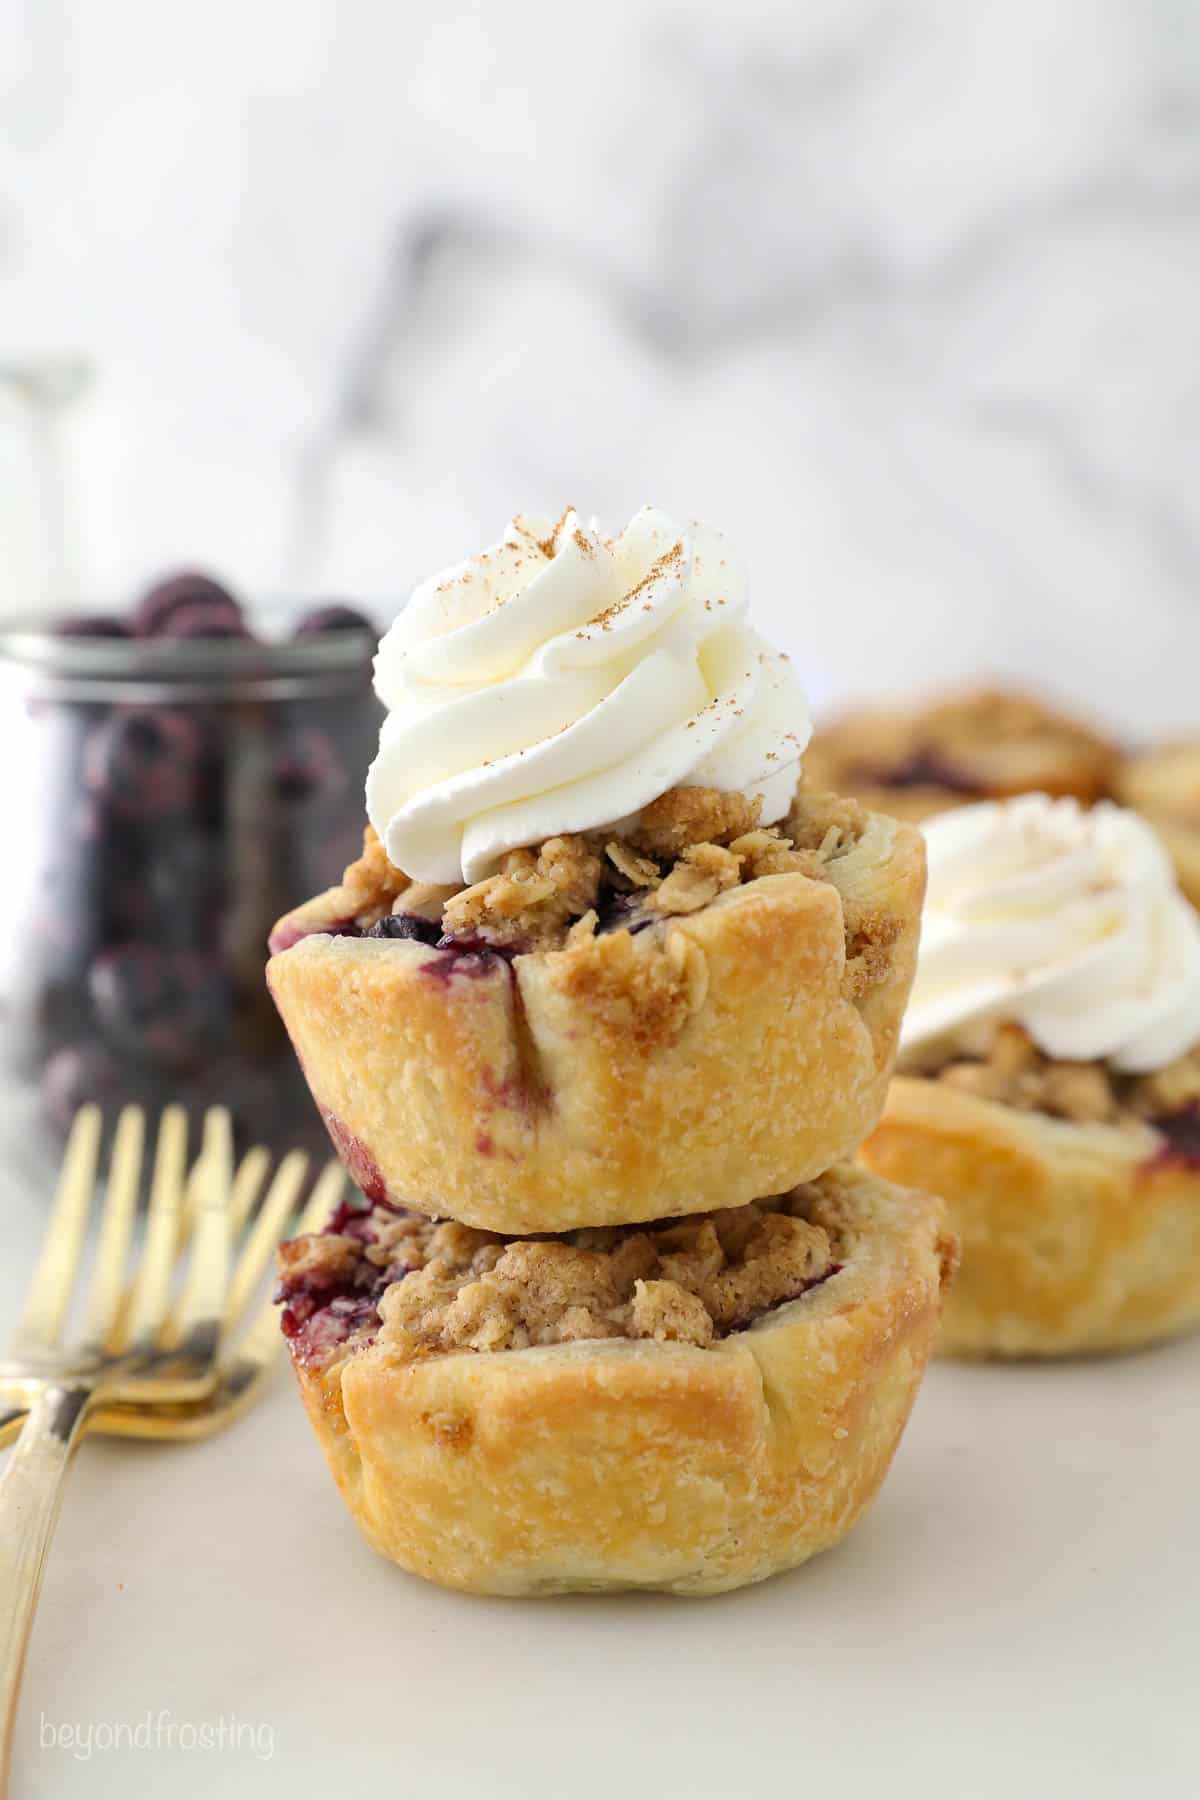 Two mini blueberry pies stacked, with gold forks next to them